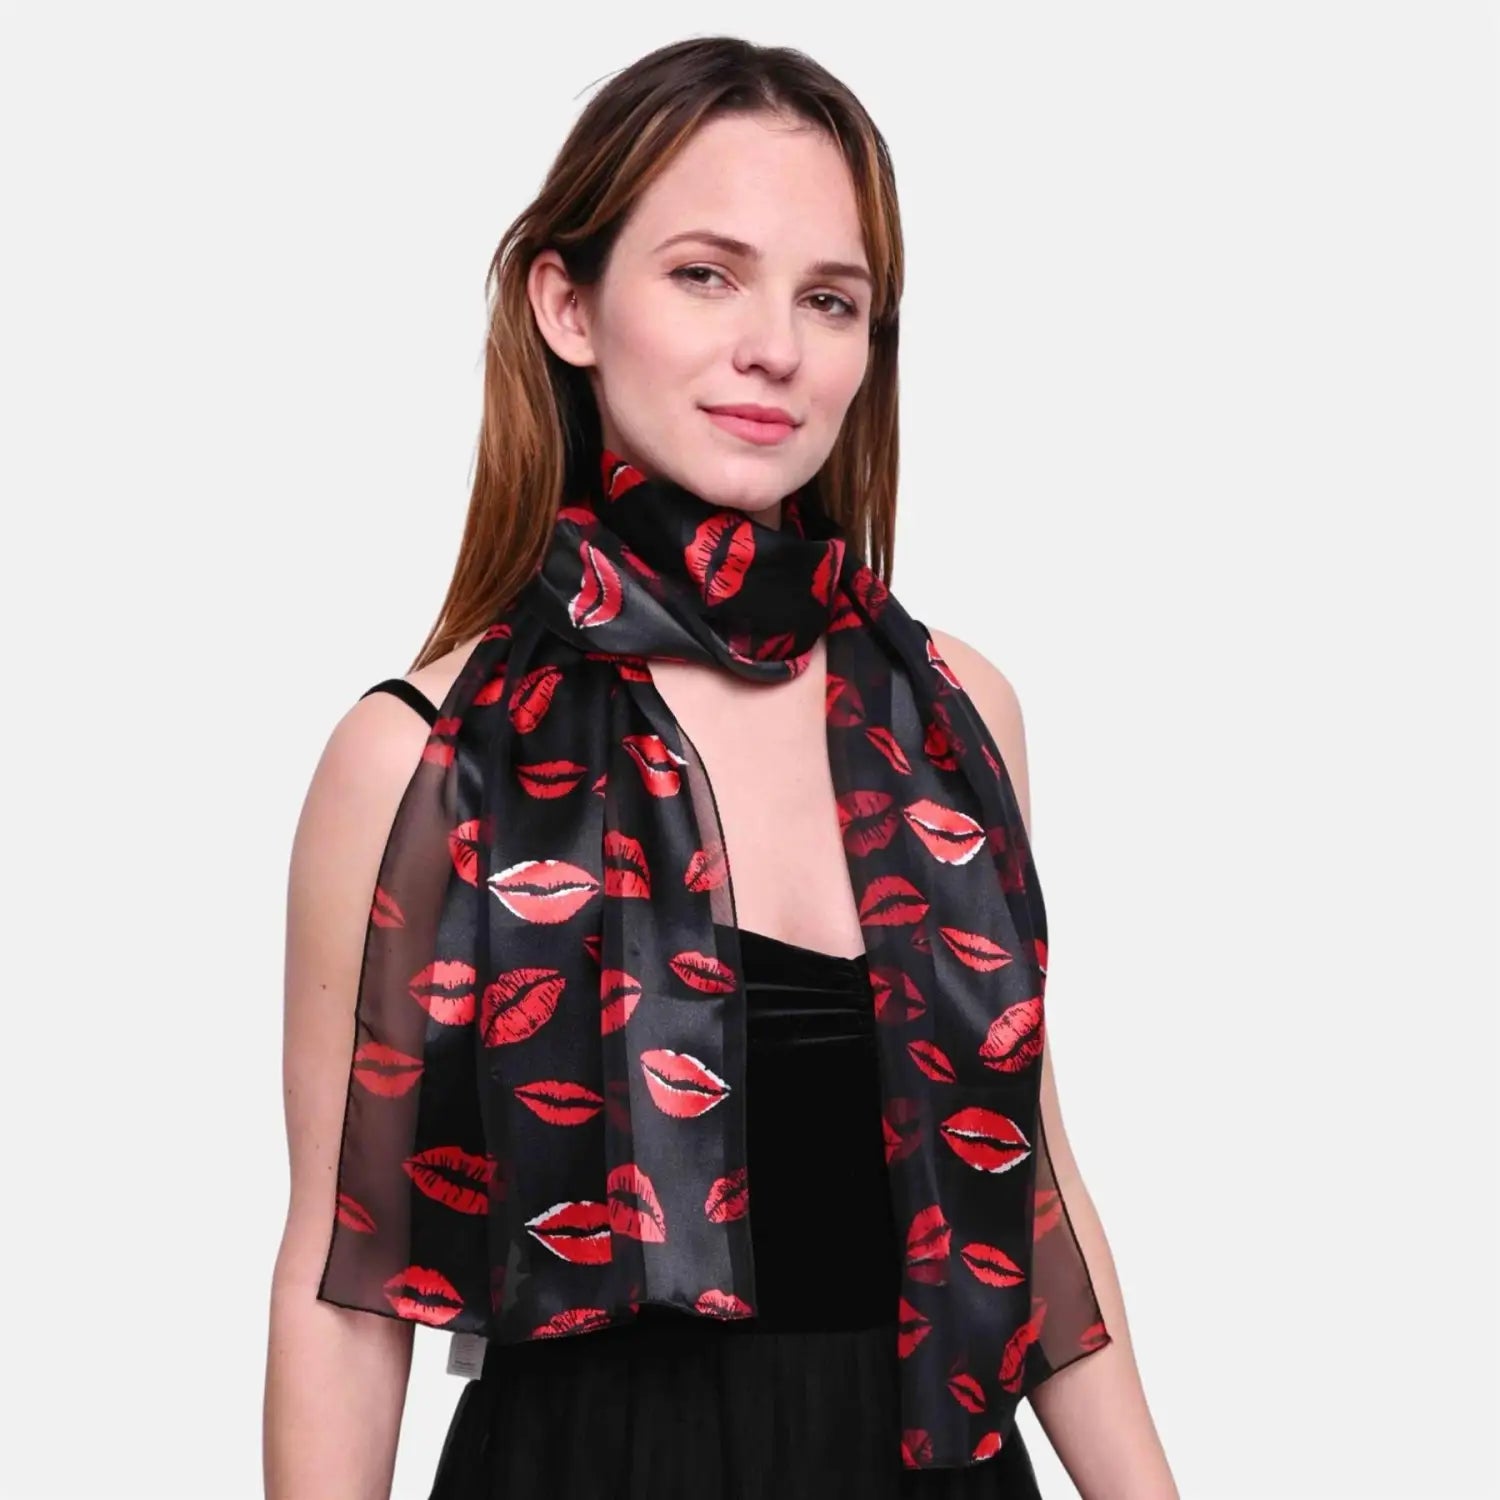 Satin lightweight scarf with kiss mark design on woman